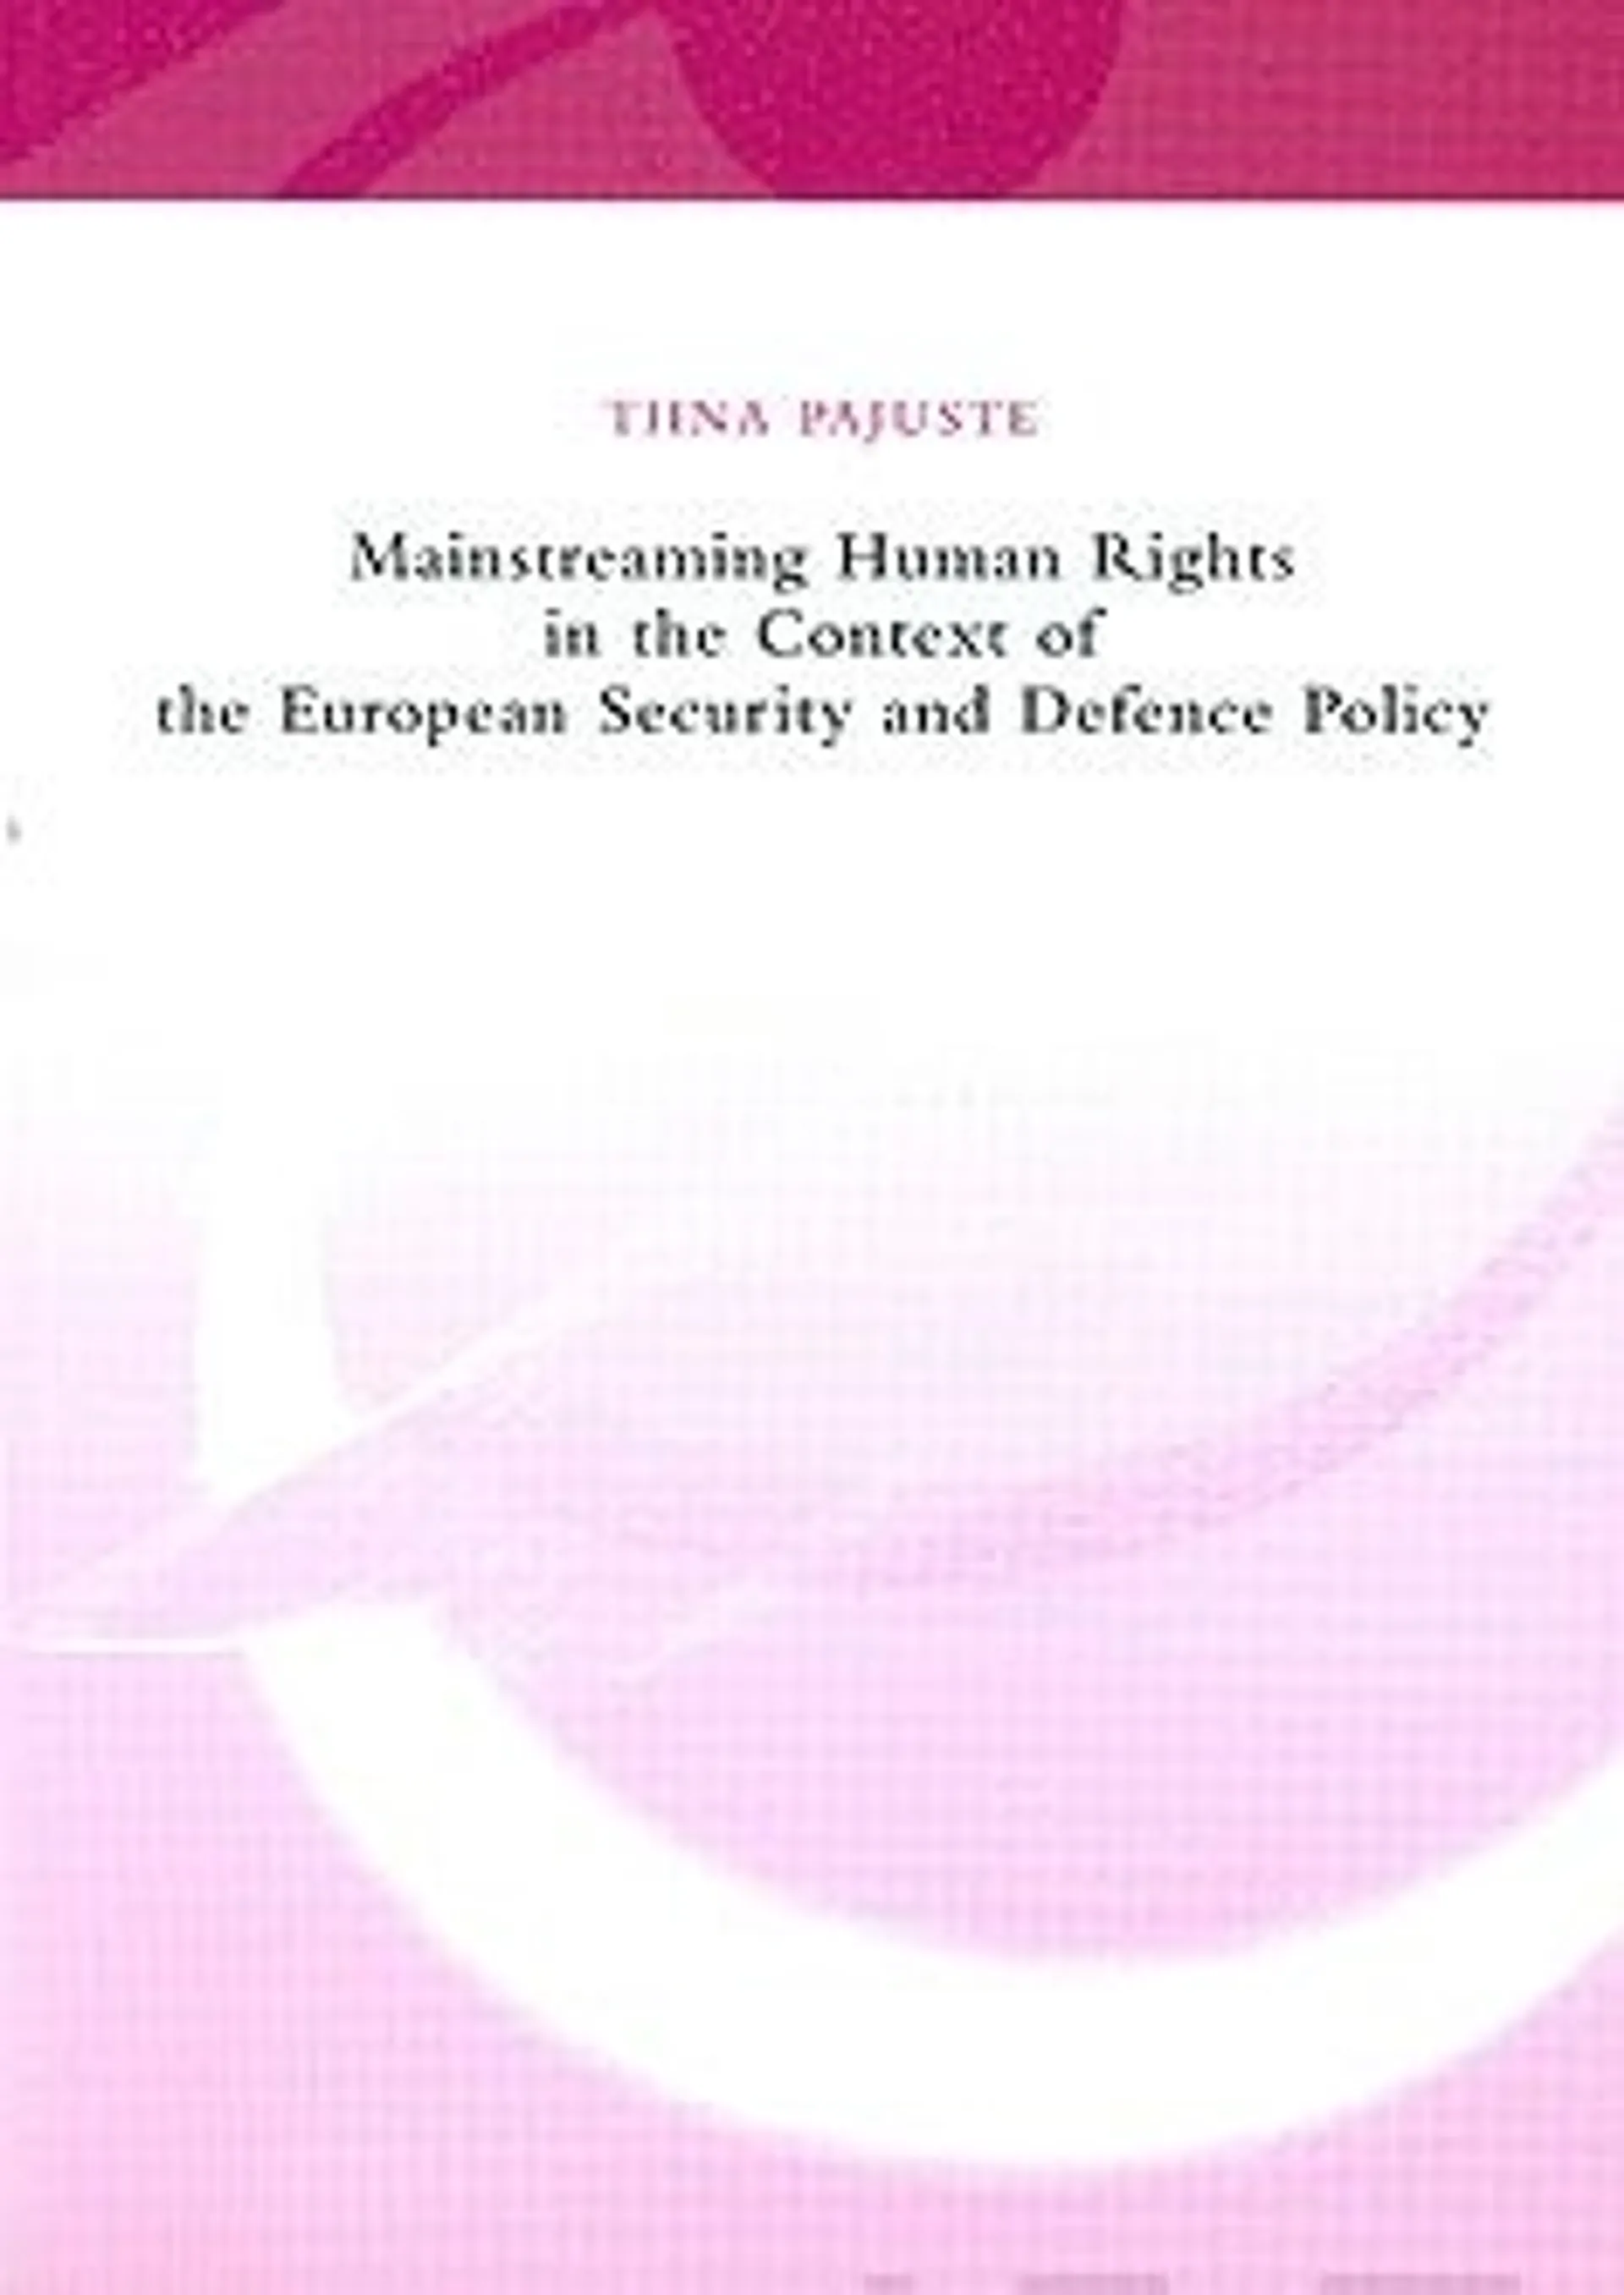 Pajuste, Mainstreaming human rights in the context of the European security and defence policy